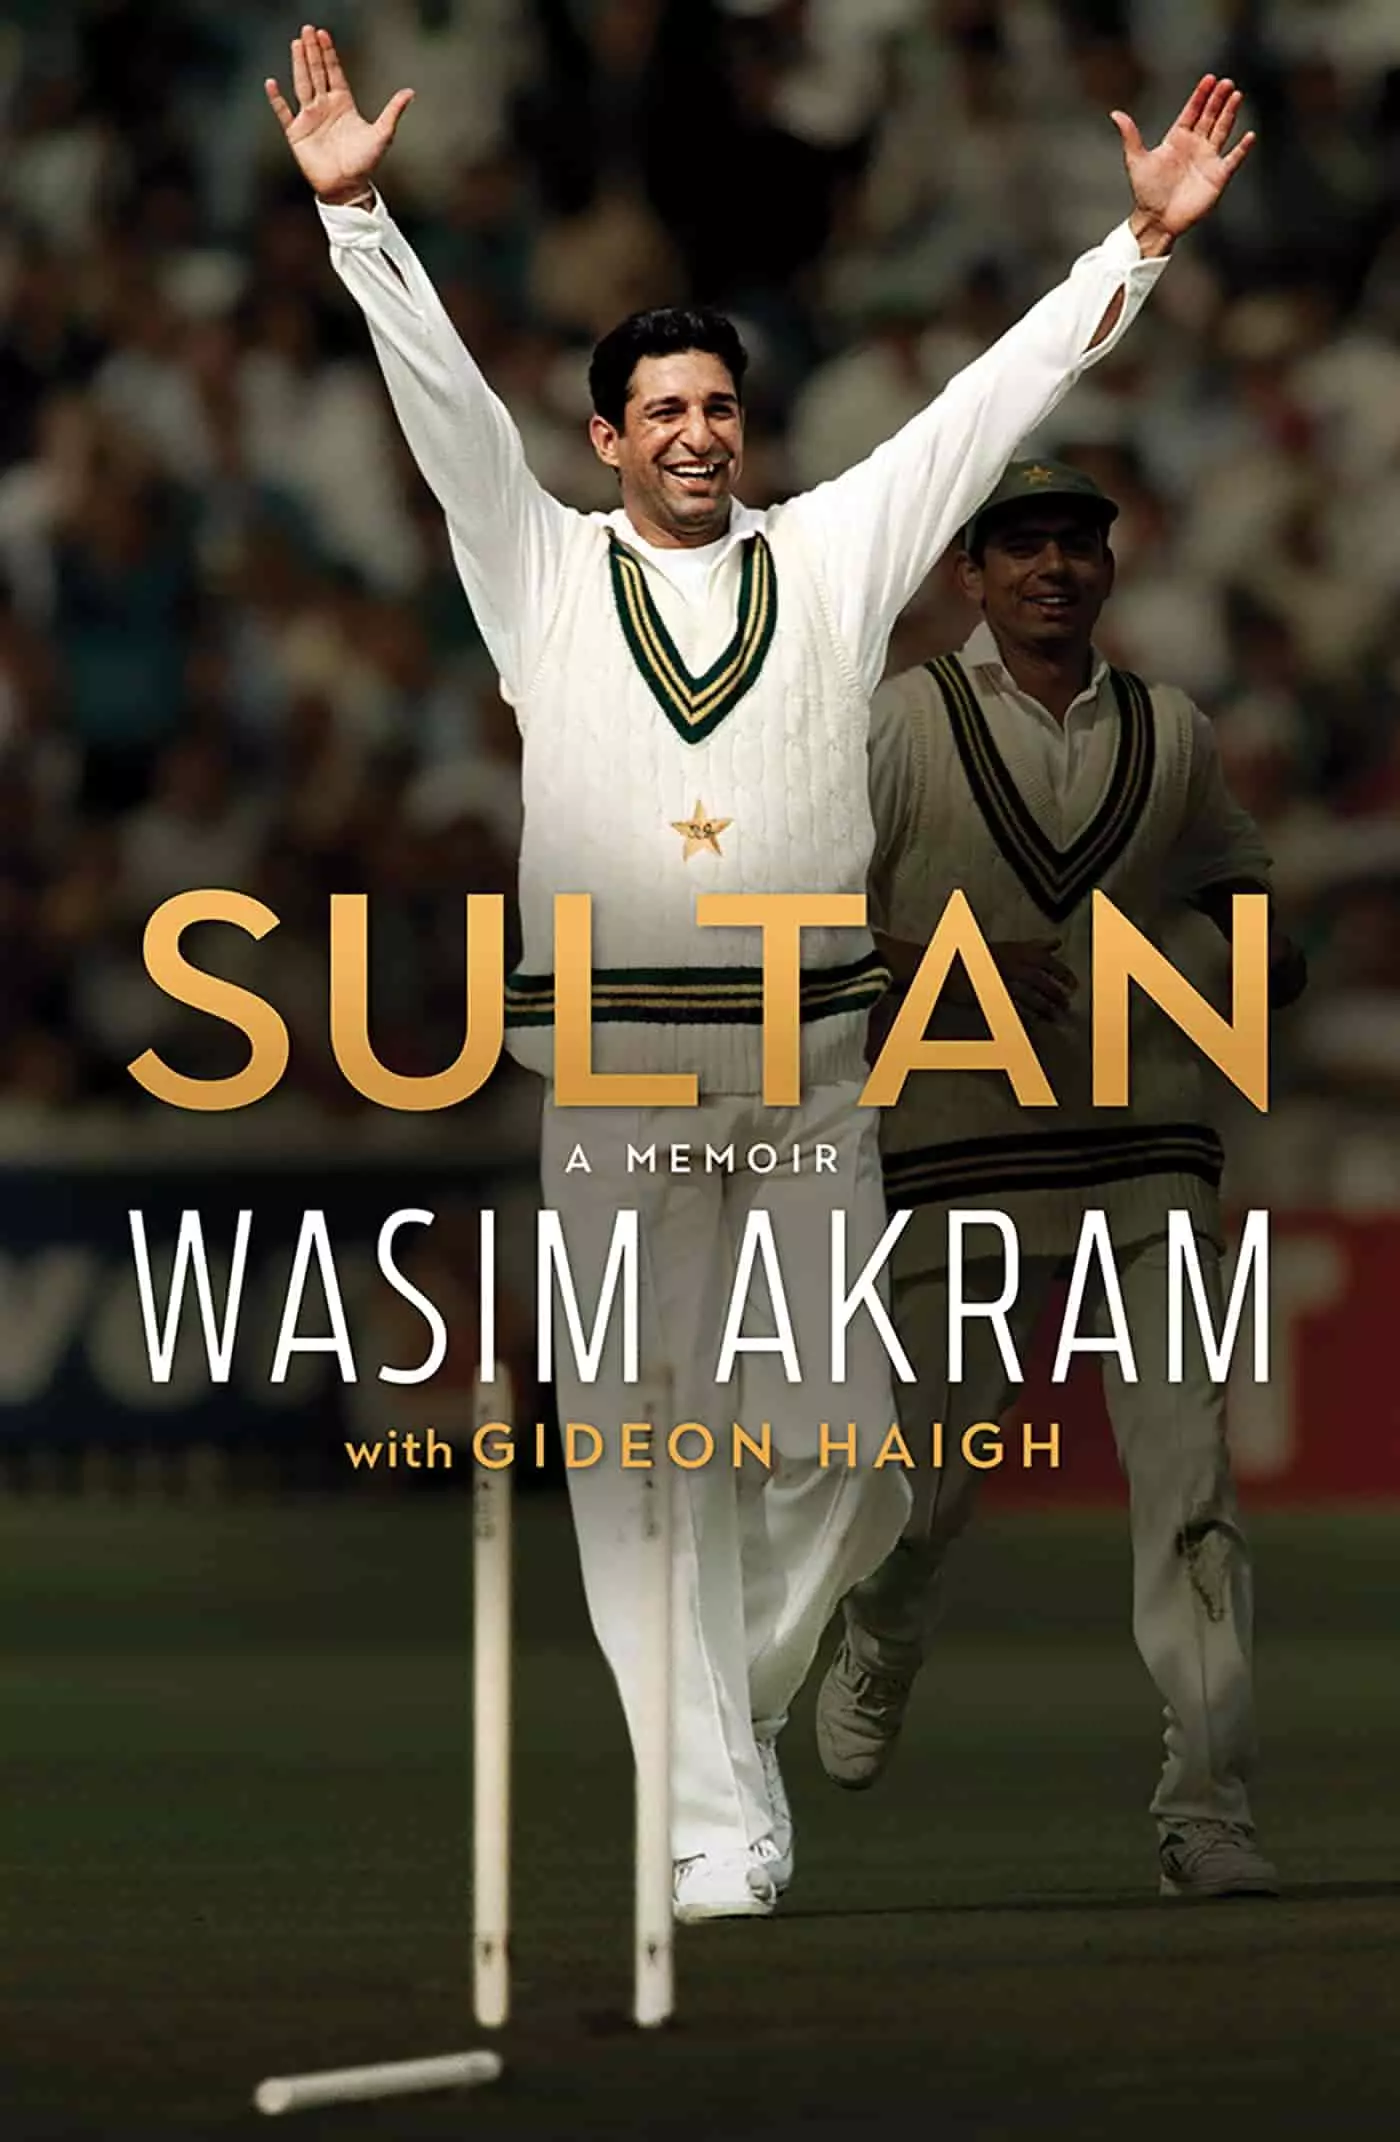 Sultan is the official biography of Wasim Akram, the "sultan of swing", one of the greatest fast bowlers in the history of cricket.